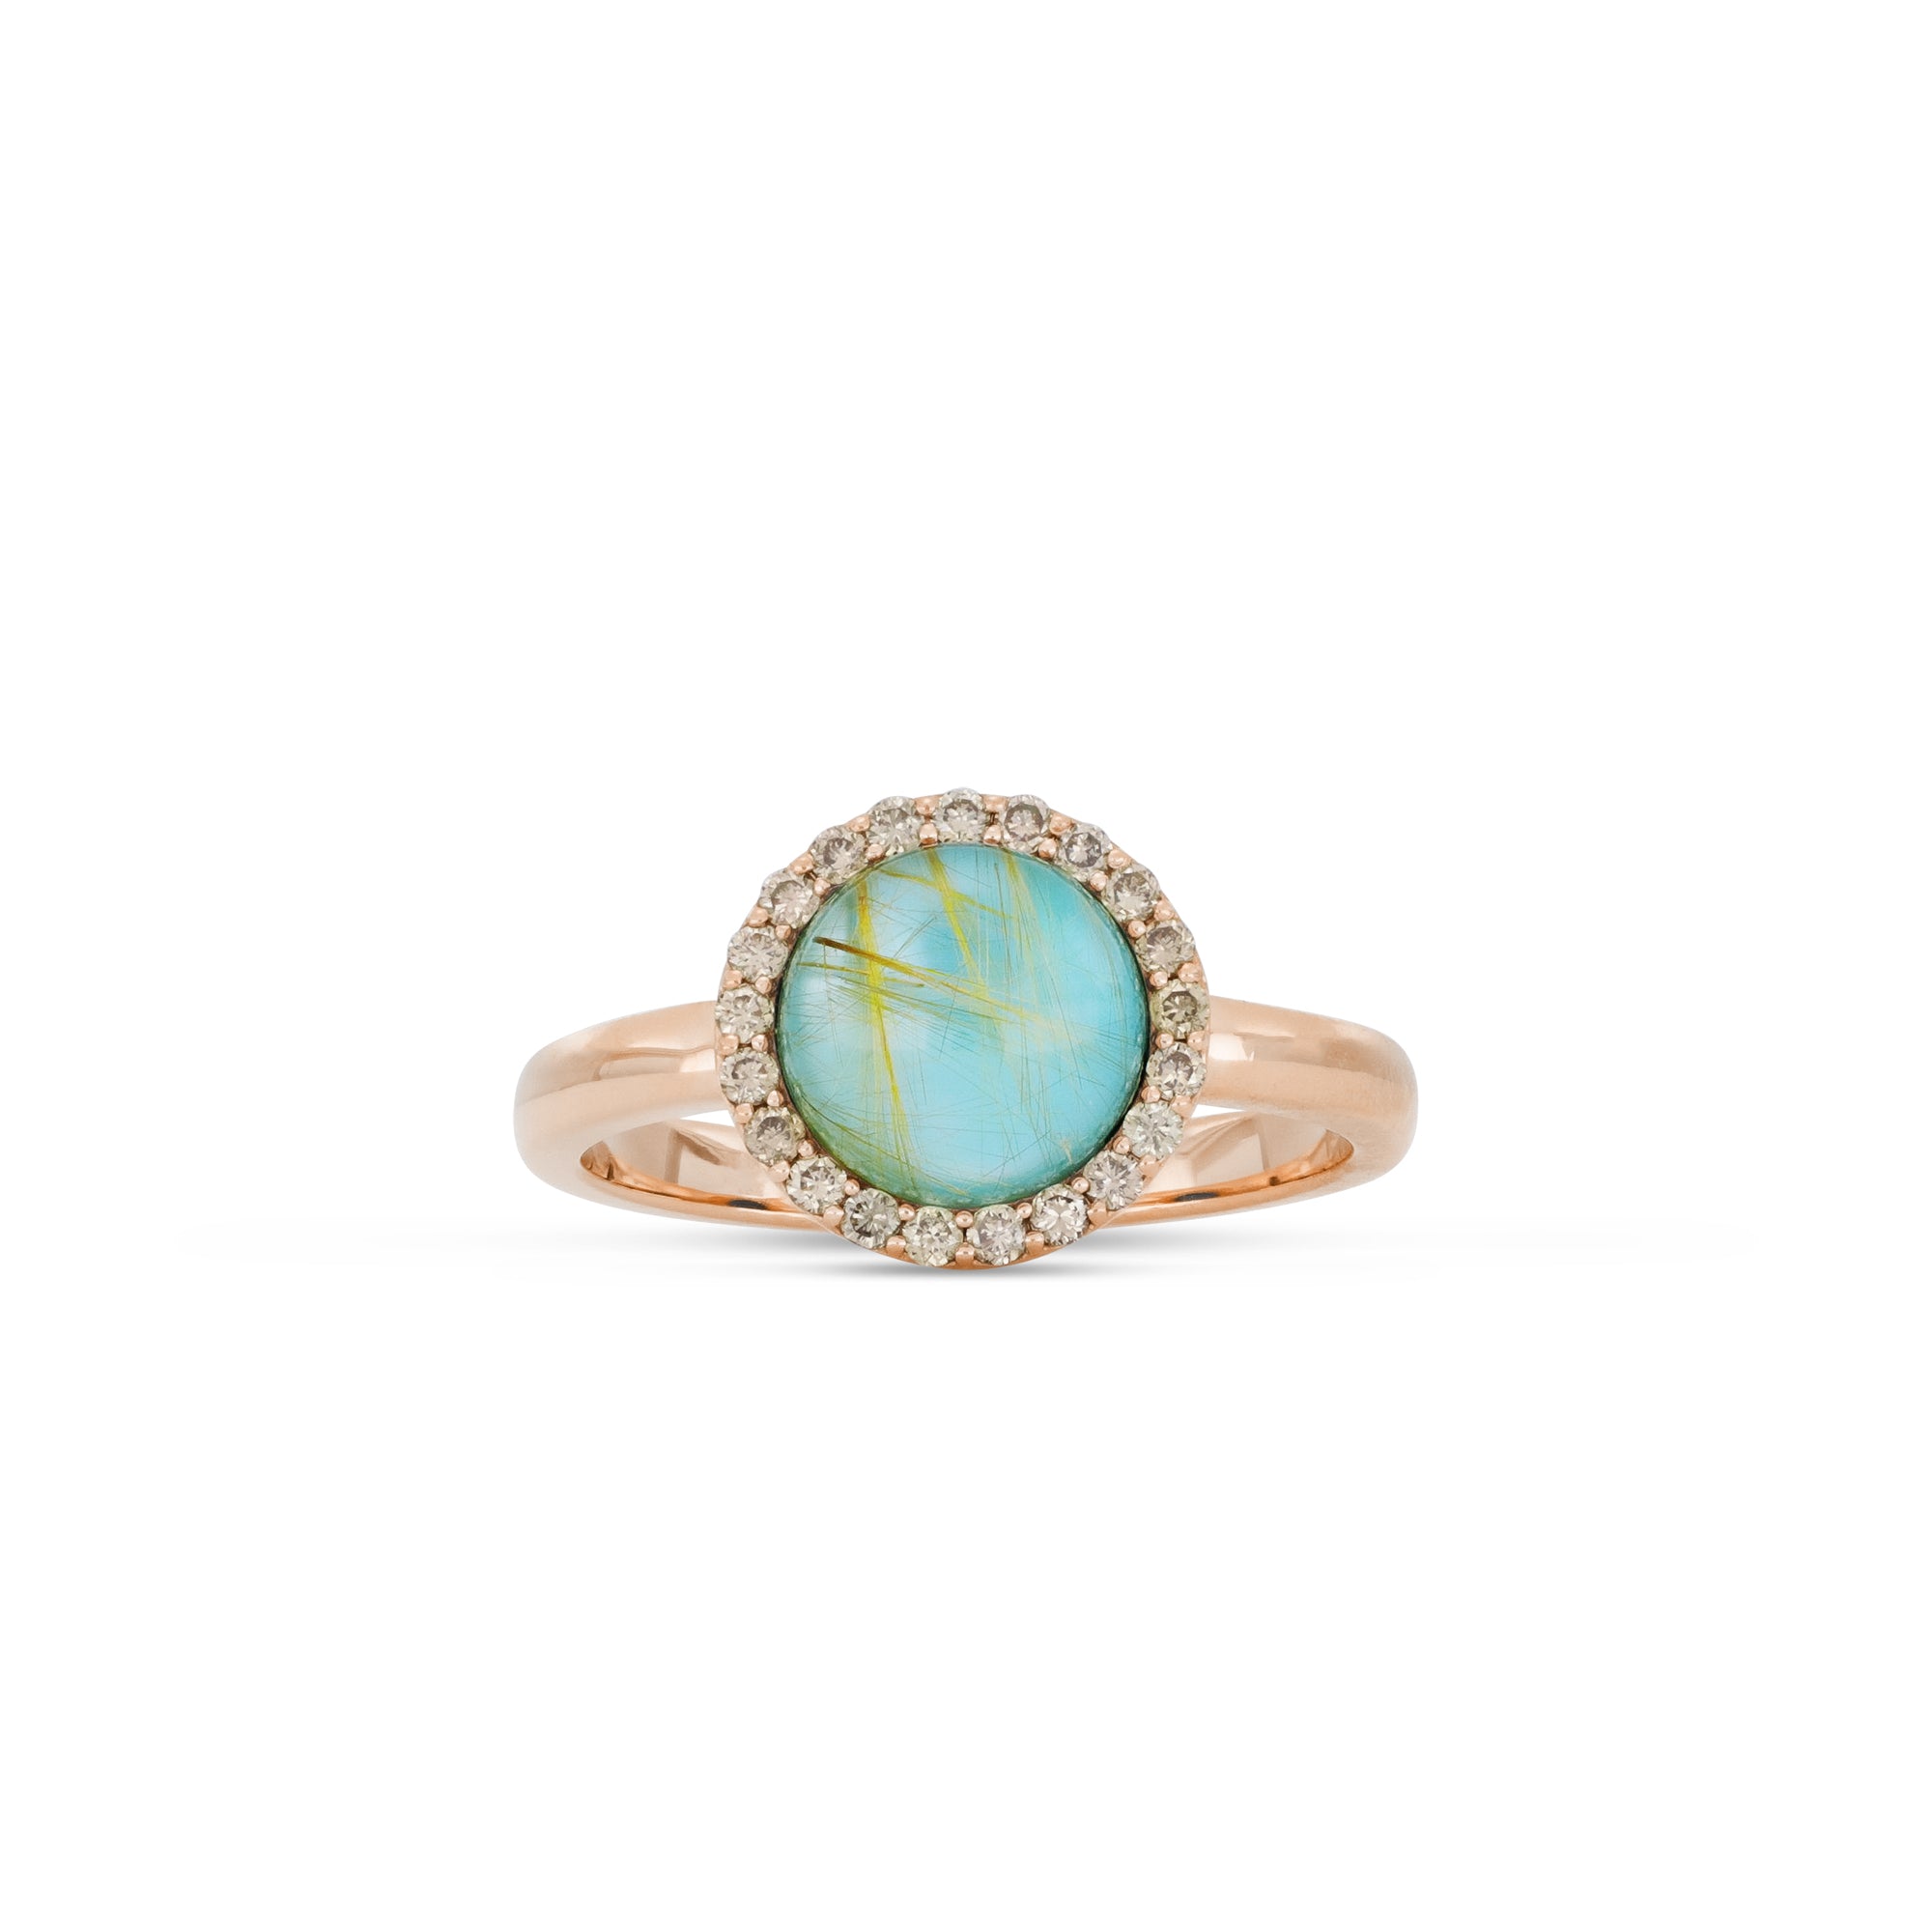 COCKTAIL RING WITH BROWN DIAMONDS, MOTHER OF PEARL RUTILE QUARTZ AND BLUE AGATE